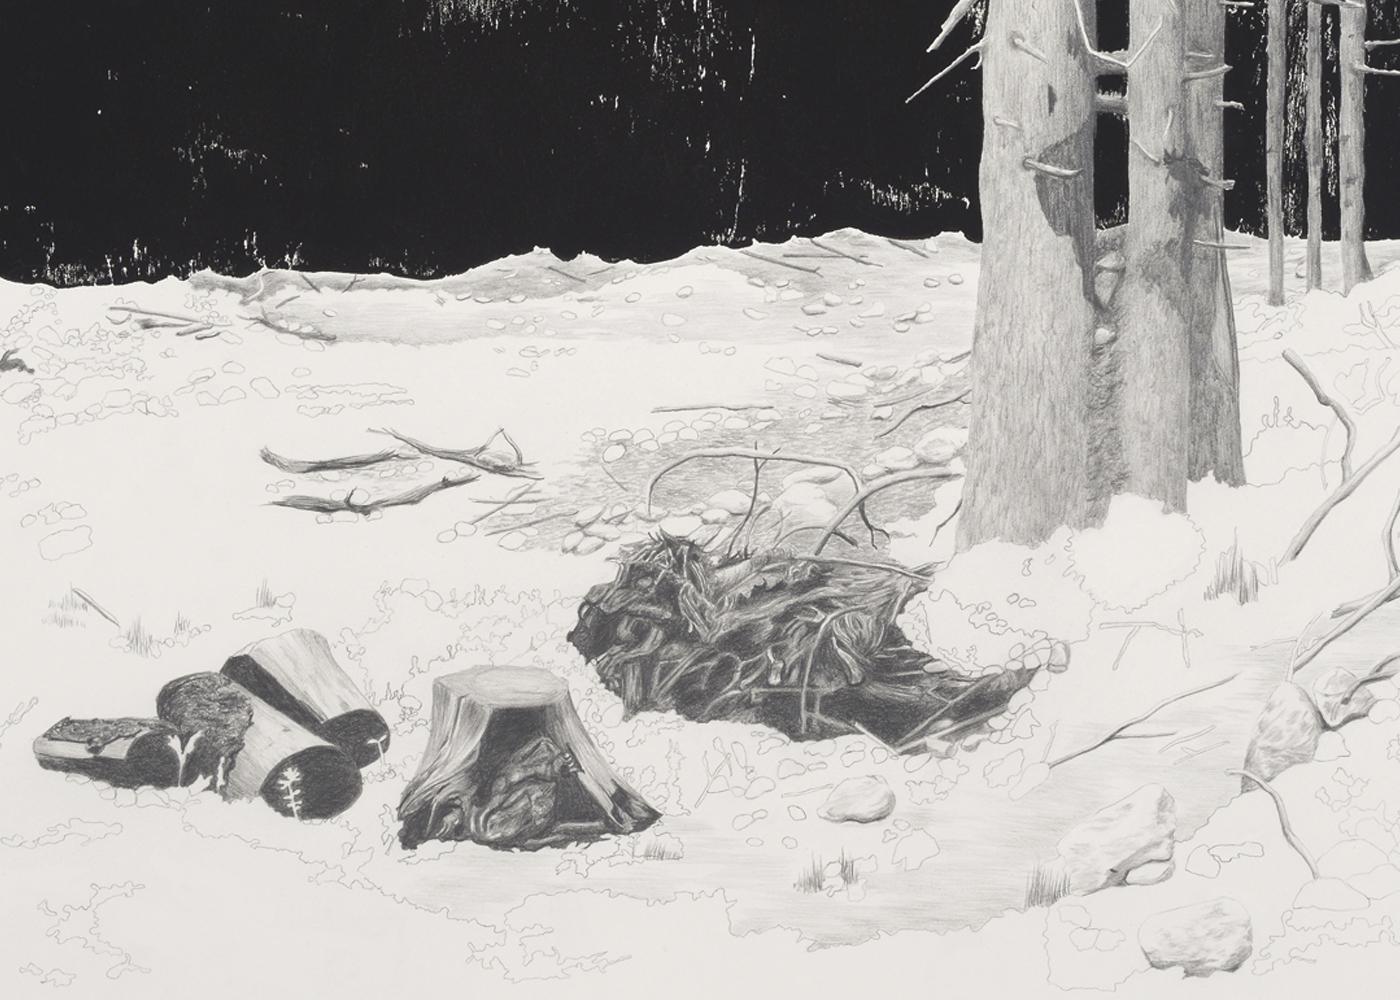 C G Schmidt, Schneise 1, woodblock print with pencil drawing of forest clearing - Art by Christiane Gerda Schmidt